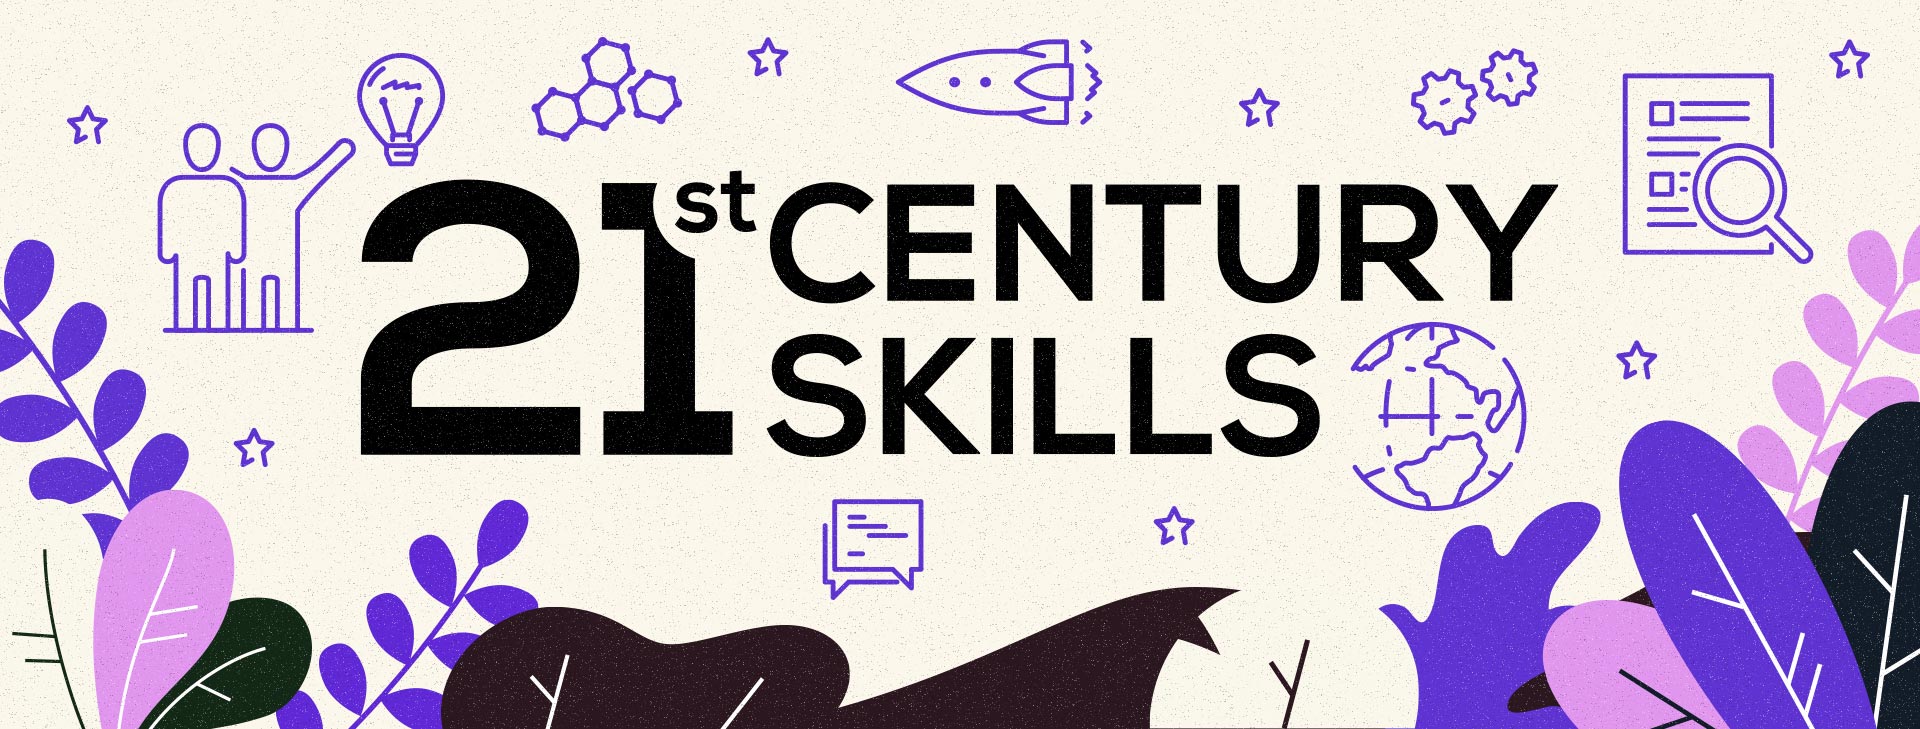 what is critical thinking in 21st century skills